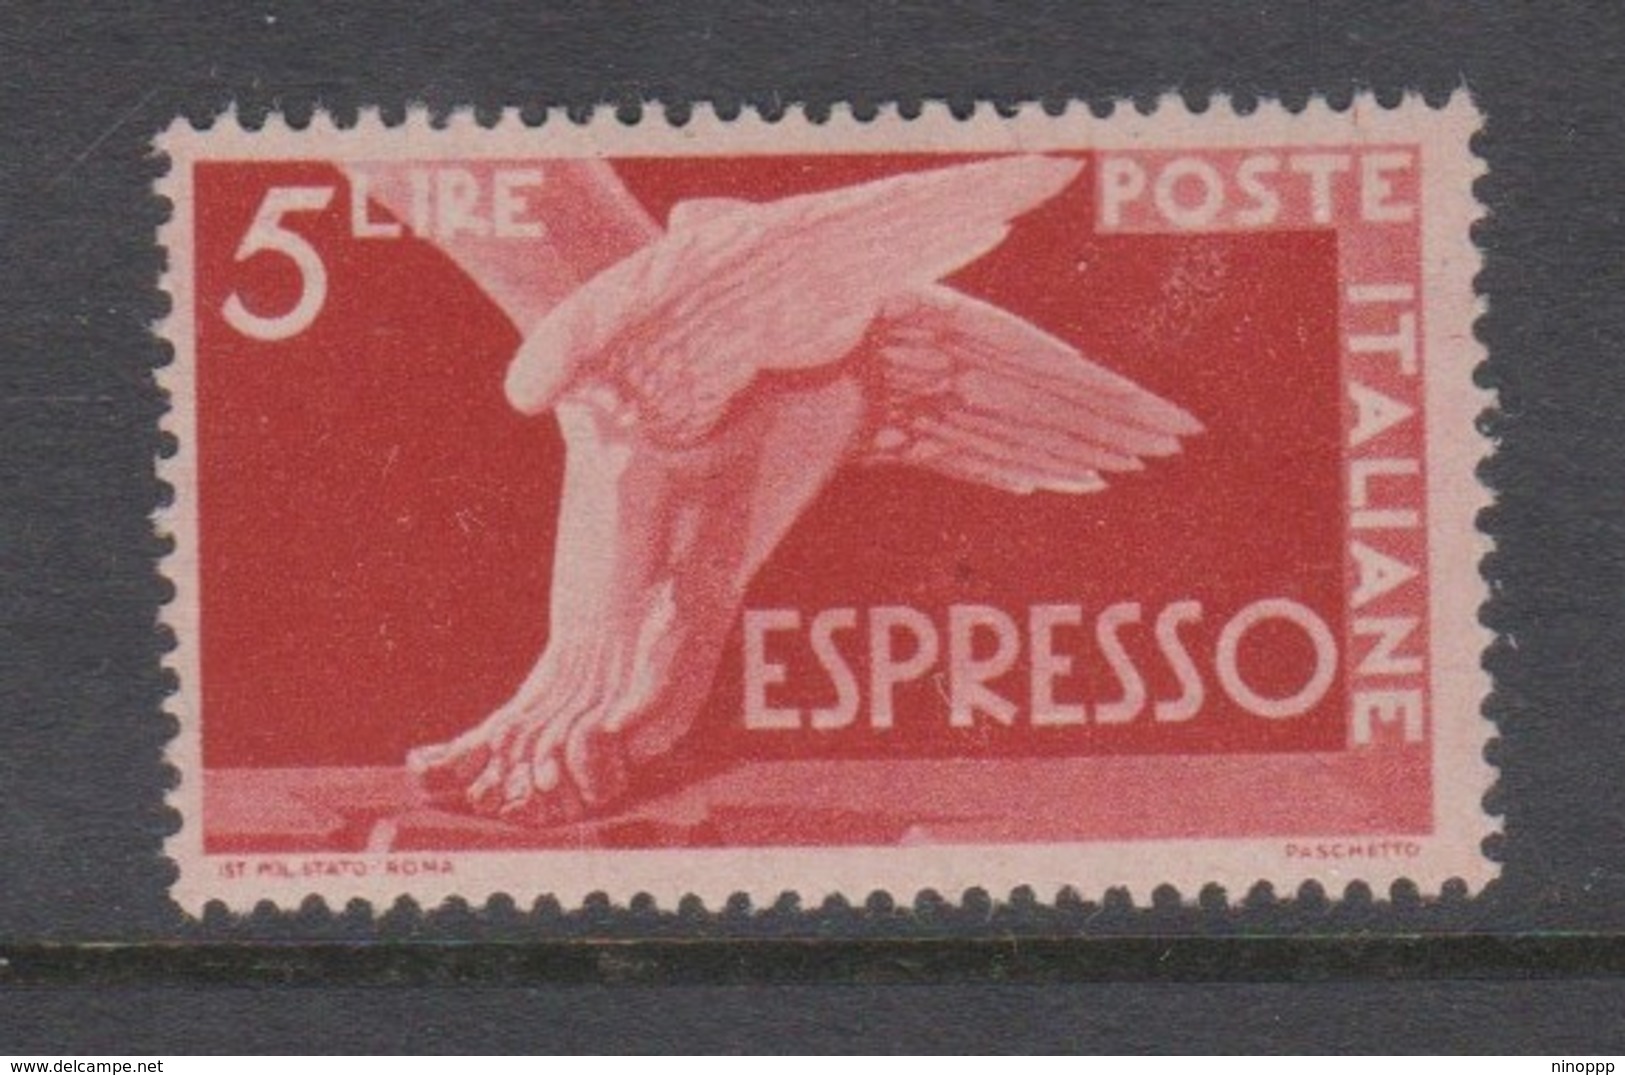 Italy E 25 1947  Special Delivery Stamp,5 Lire Red Brown,mint Hinged - Express/pneumatic Mail